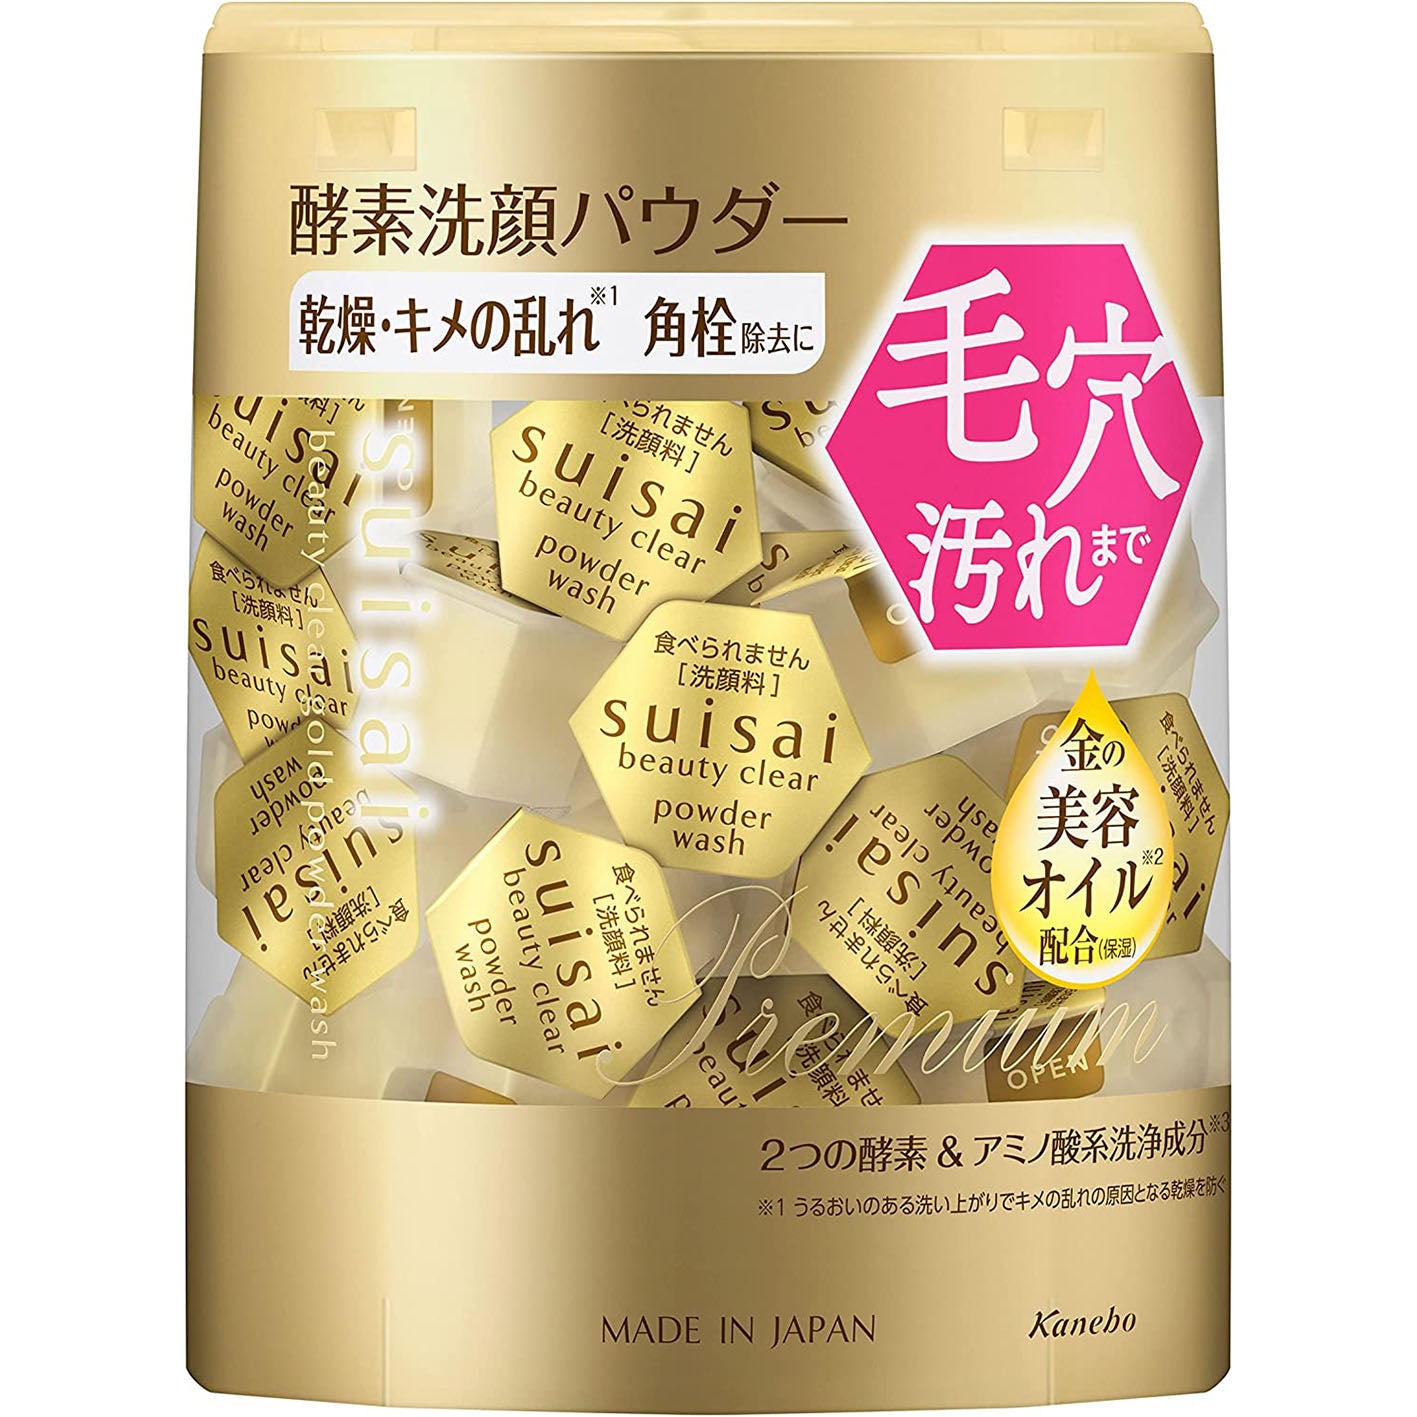 Kanebo Suisai Beauty Clear Gold Powder Wash Enzyme Face Wash Face Wash Powder 0.4g - 32pieces - Harajuku Culture Japan - Japanease Products Store Beauty and Stationery